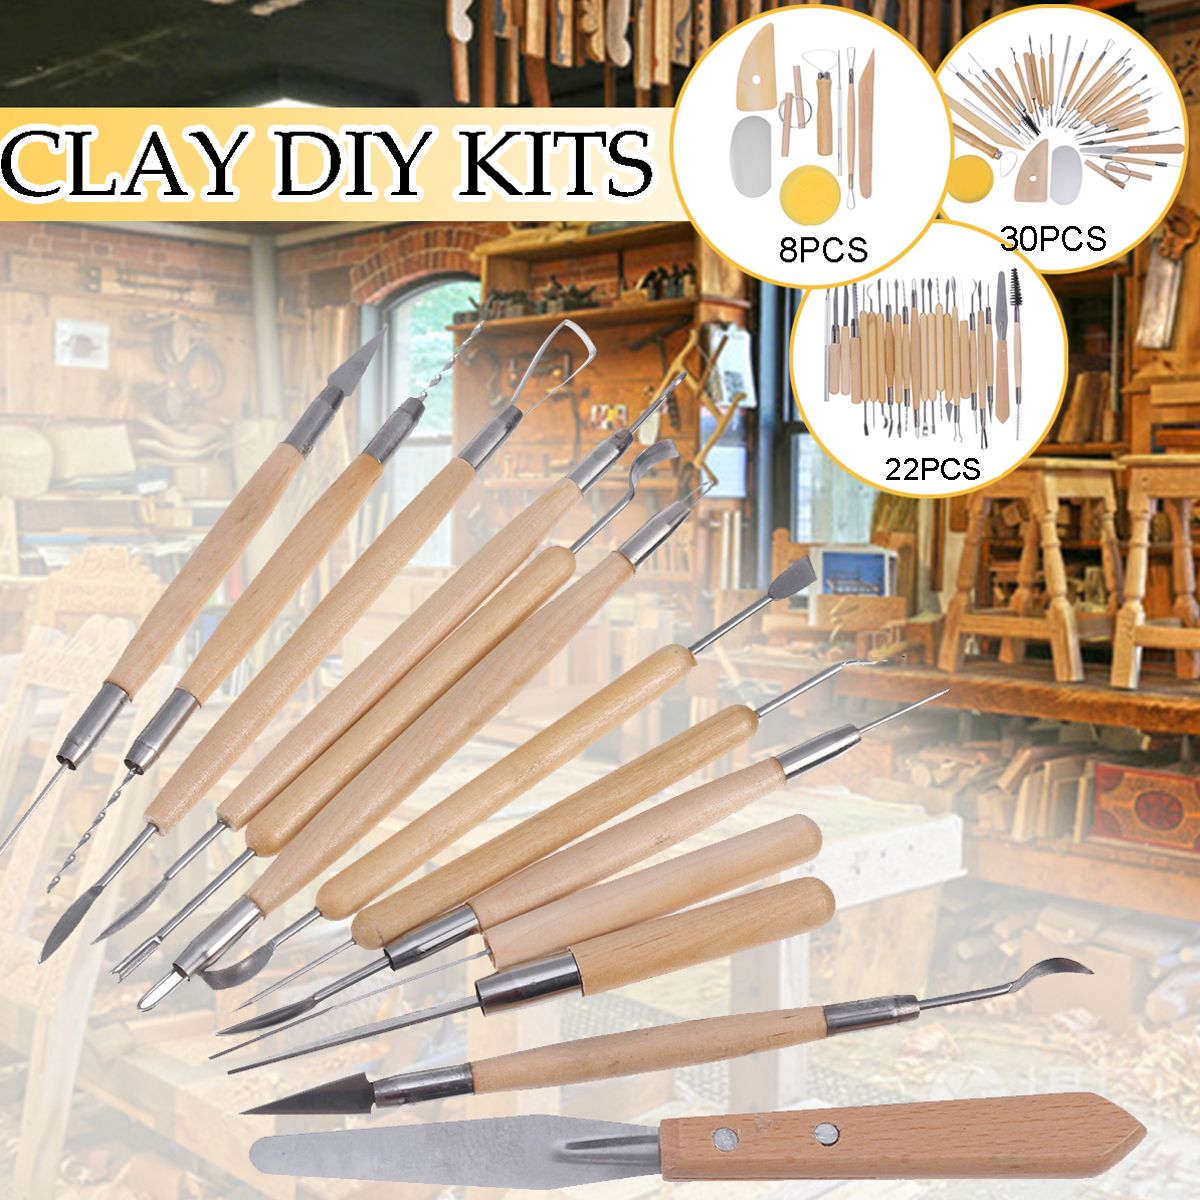 82230PCS-Leather-Craft-Tools-Carving-Stitching-Sewing-Sculpture-Ceramic-Kit-1683612